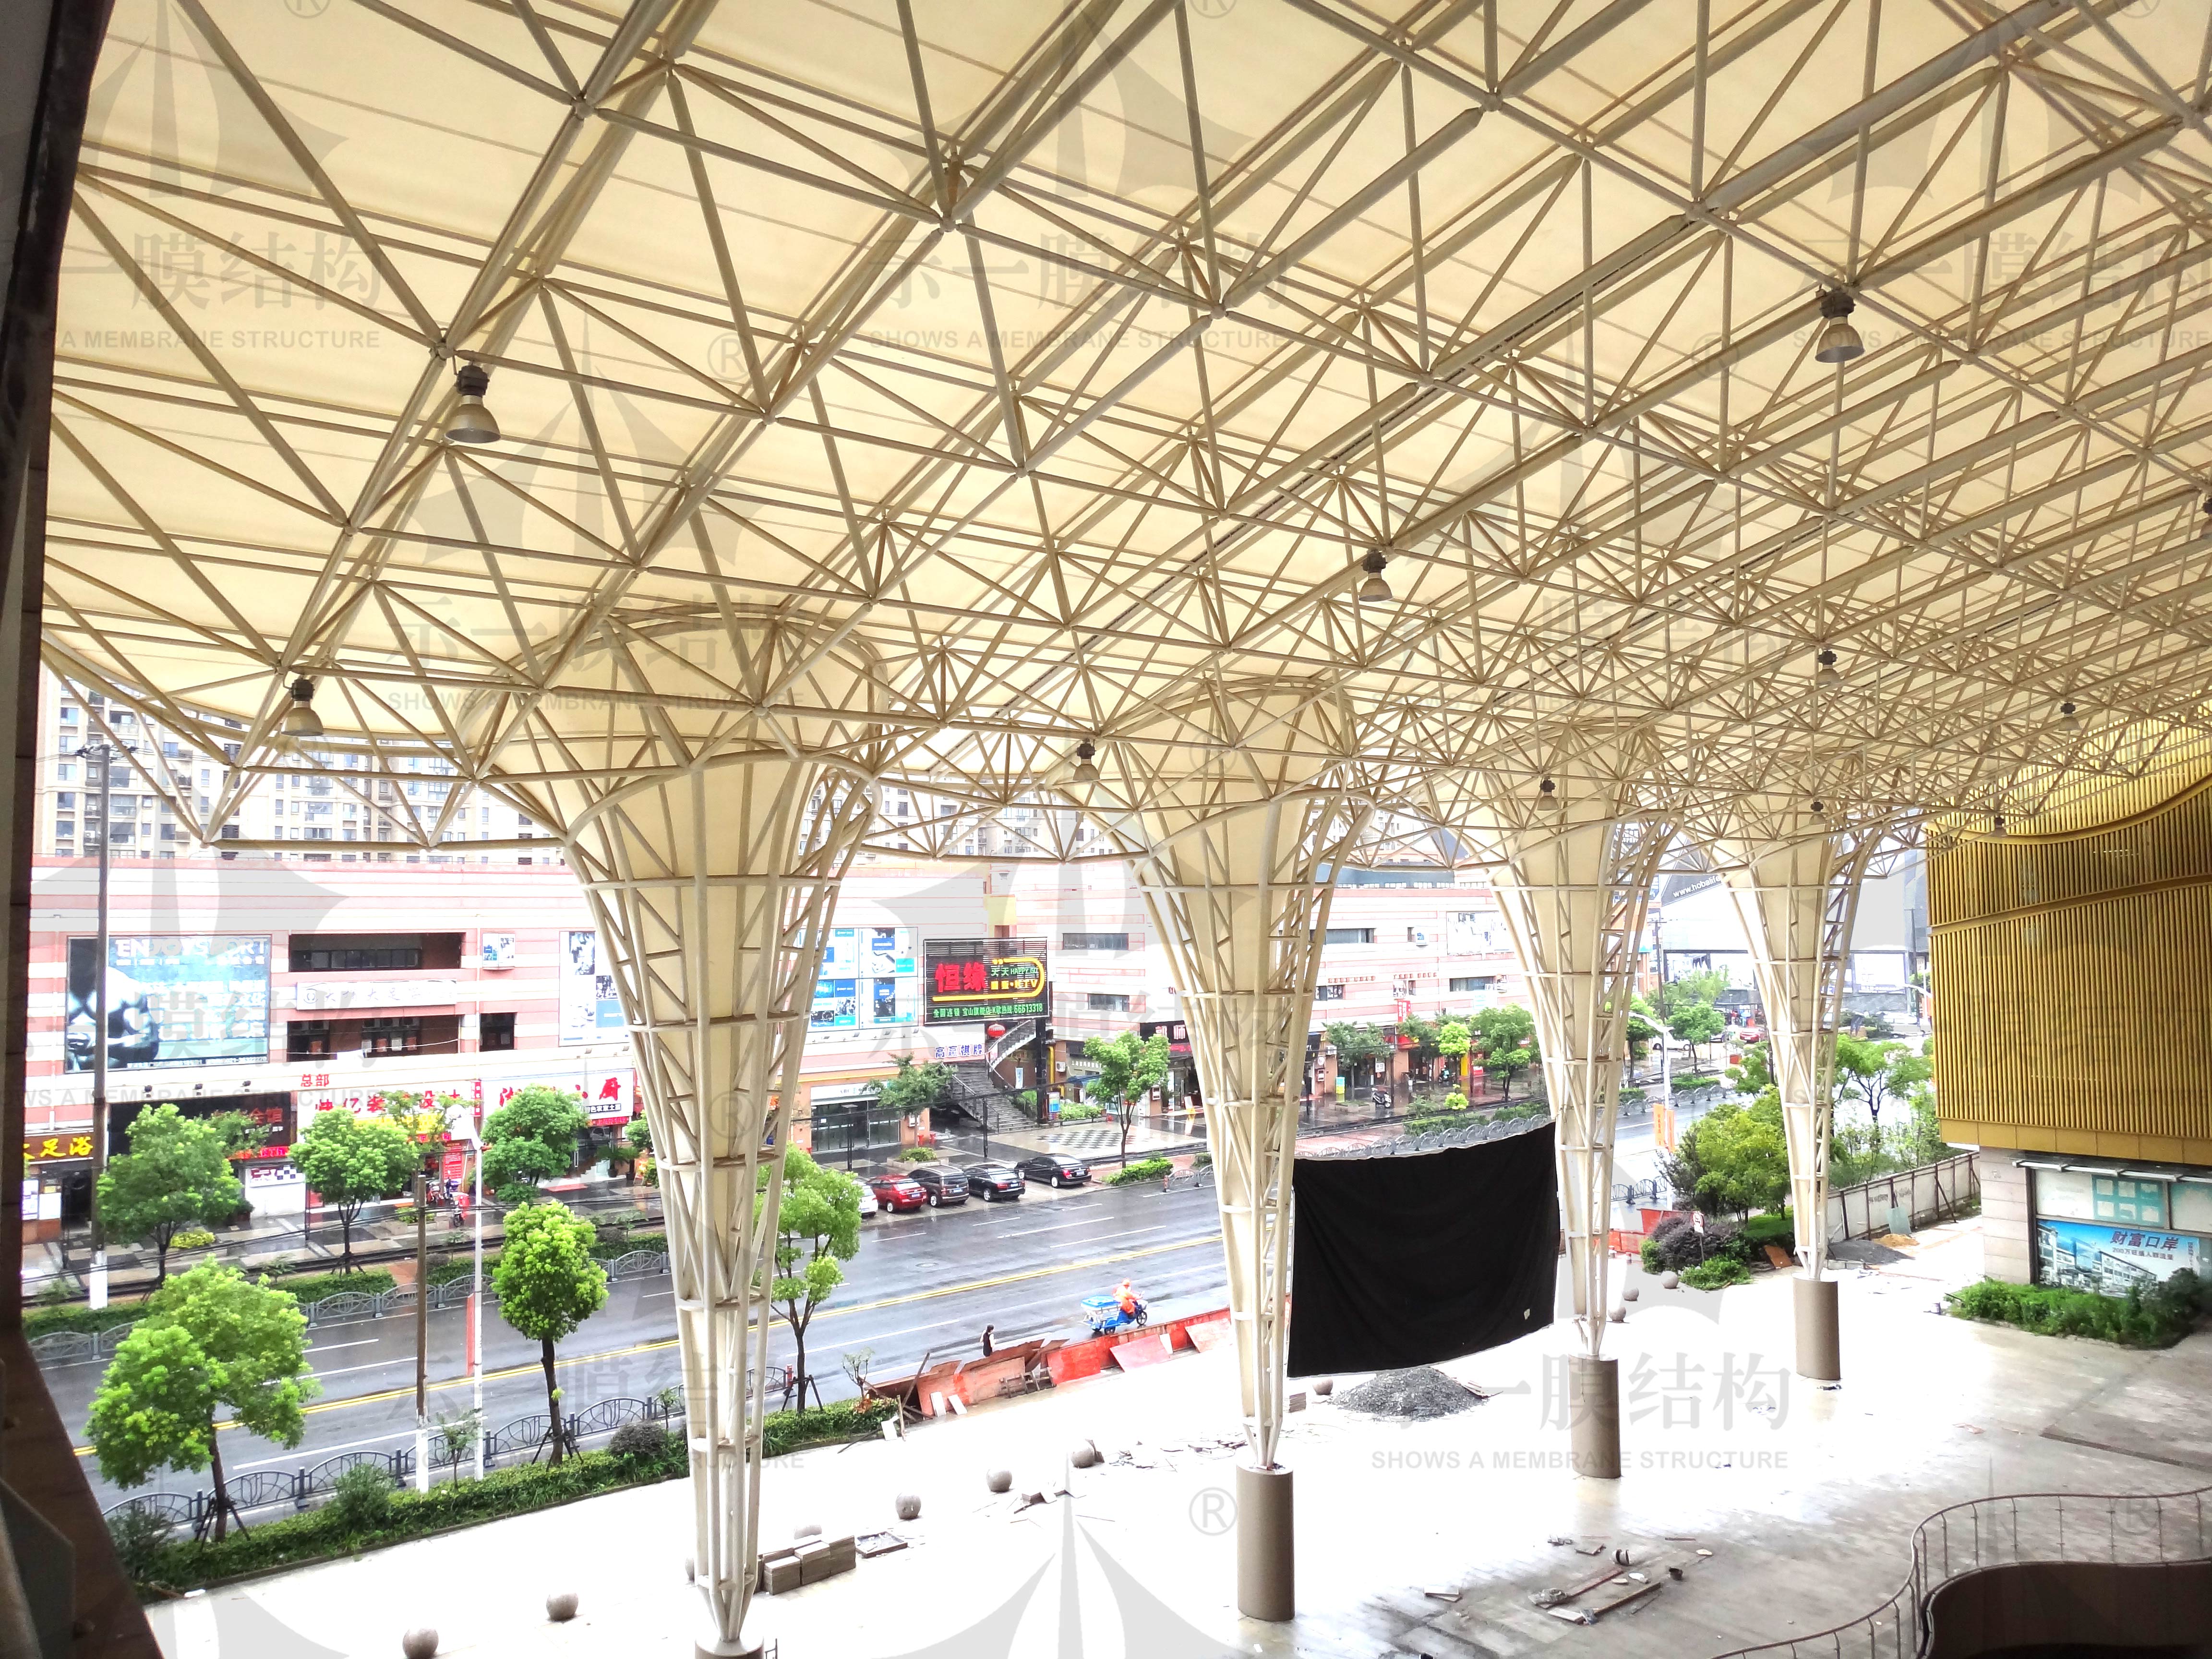 Membrane structure canopy of Shanghai Changjiang Trade Plaza